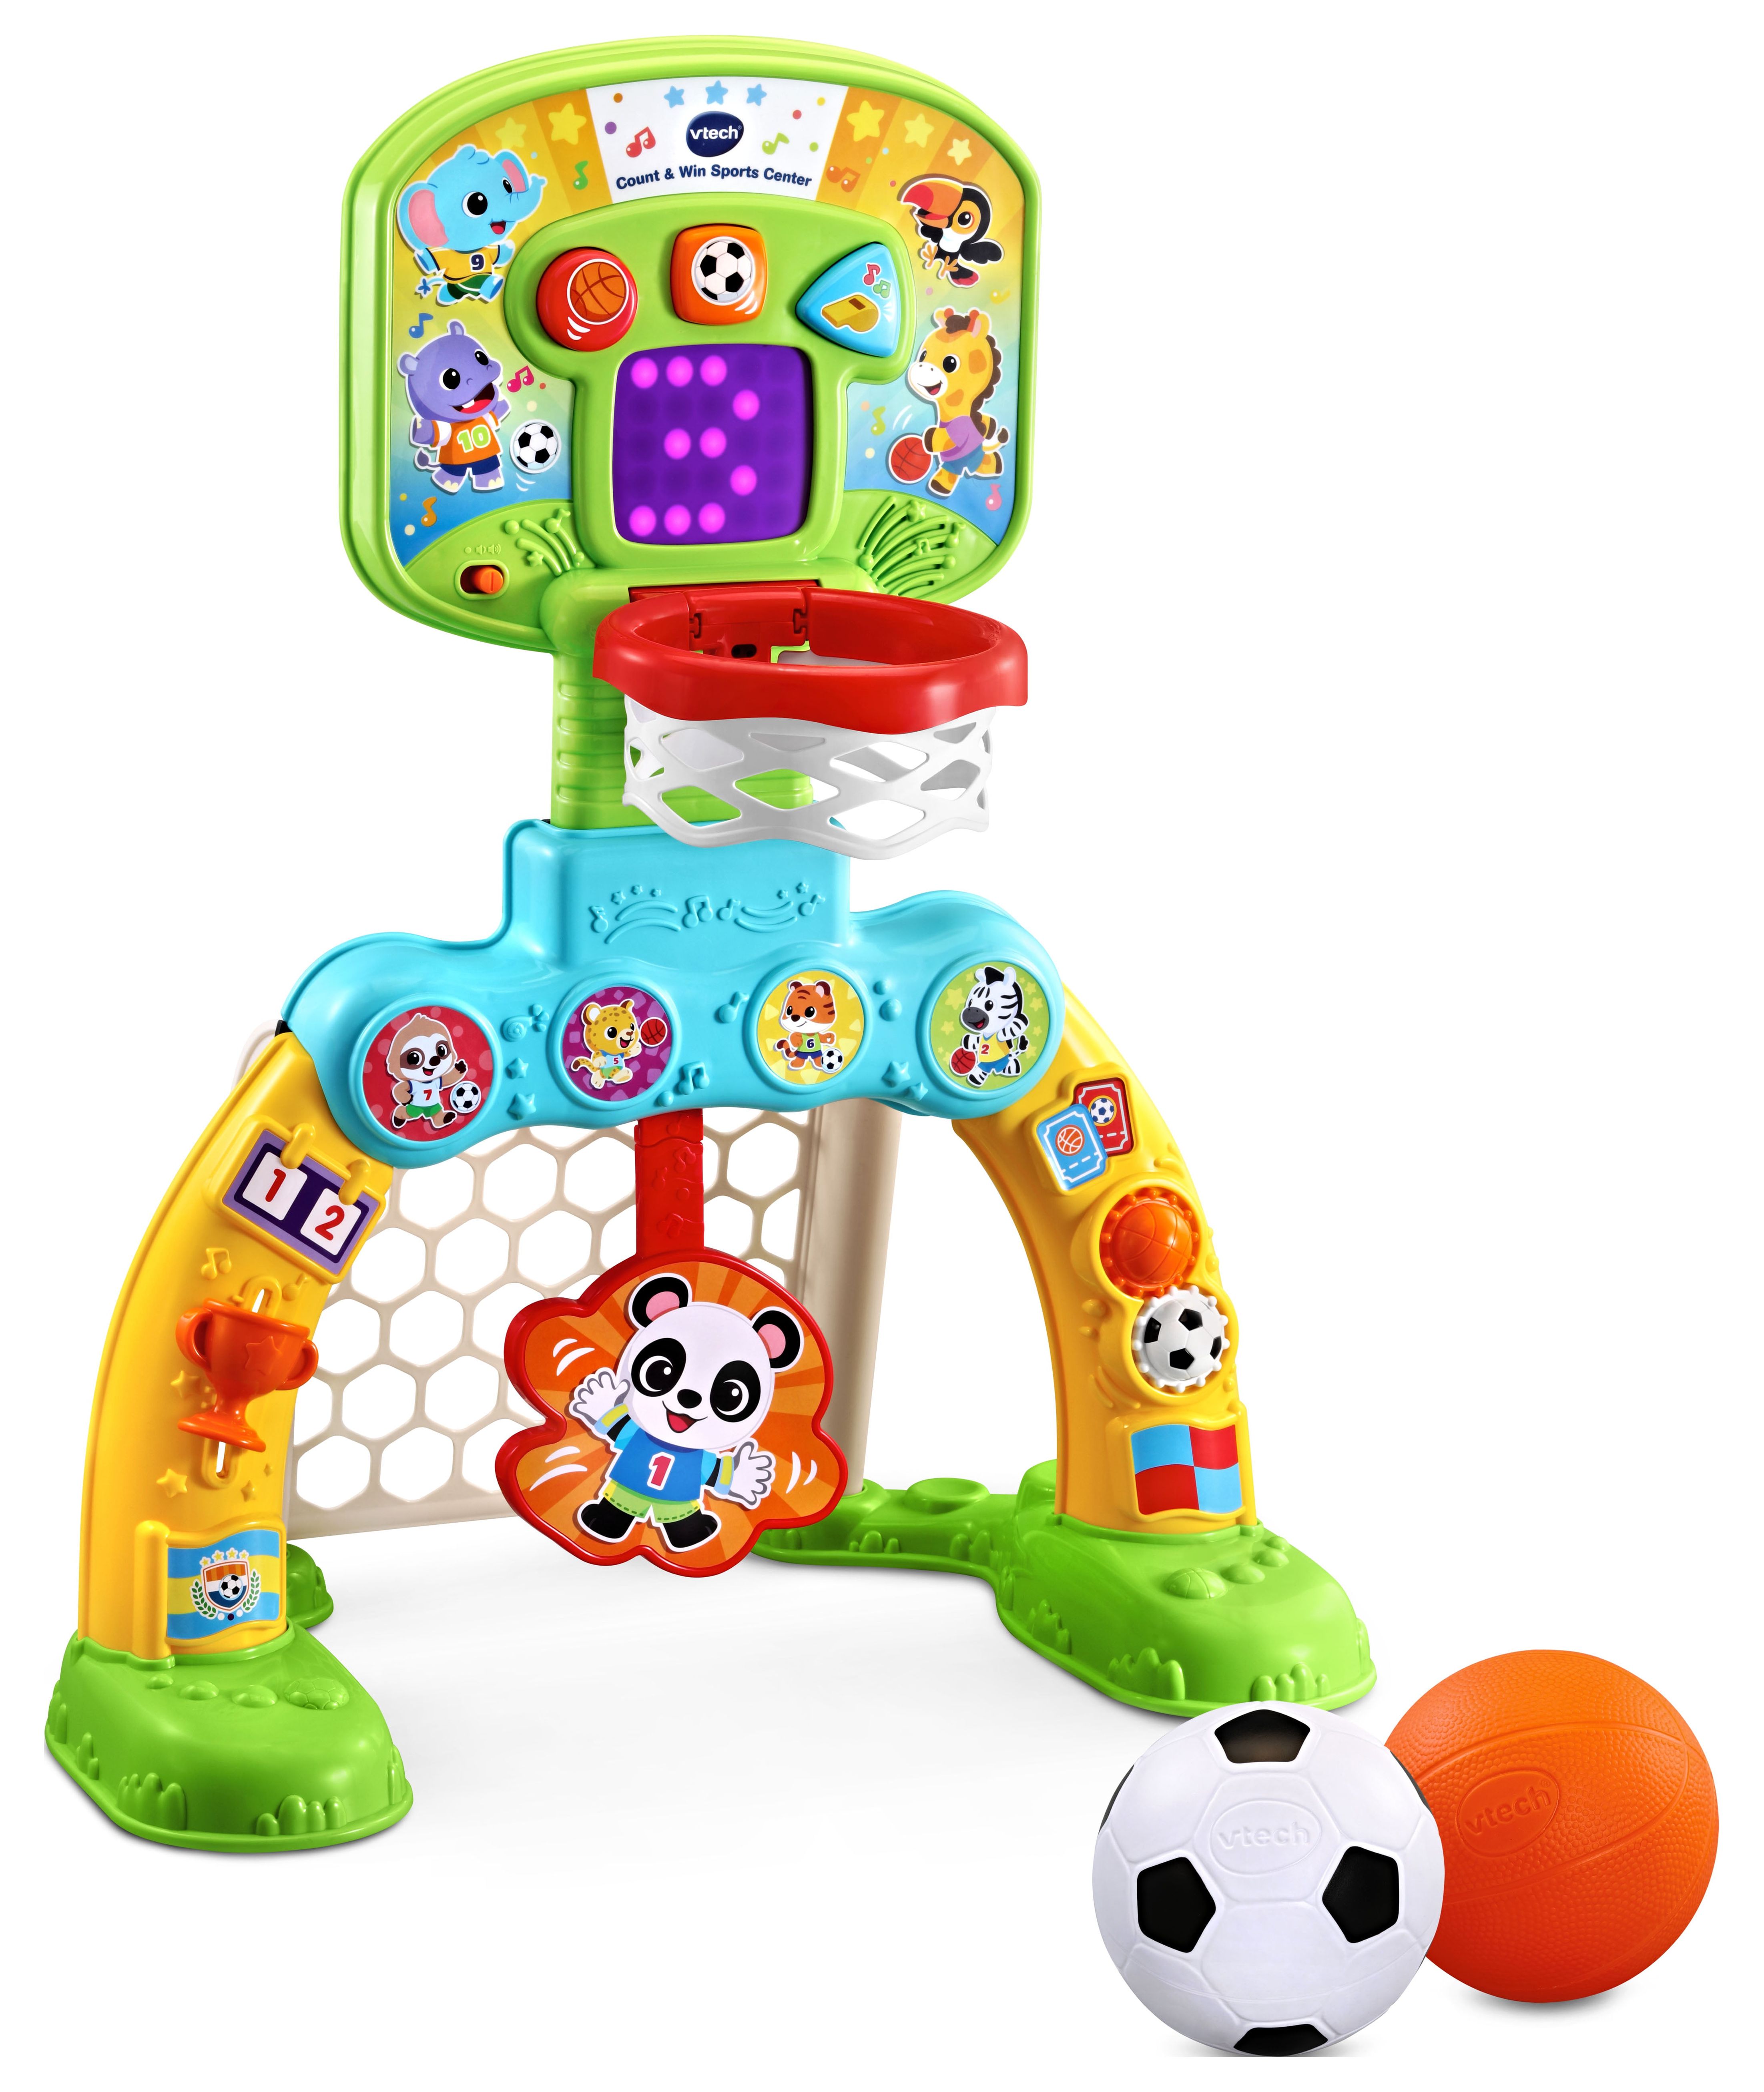 VTech Count & Win Sports Center, Basketball and Soccer Toy for Toddlers, Teaches Physical Activity - image 9 of 13